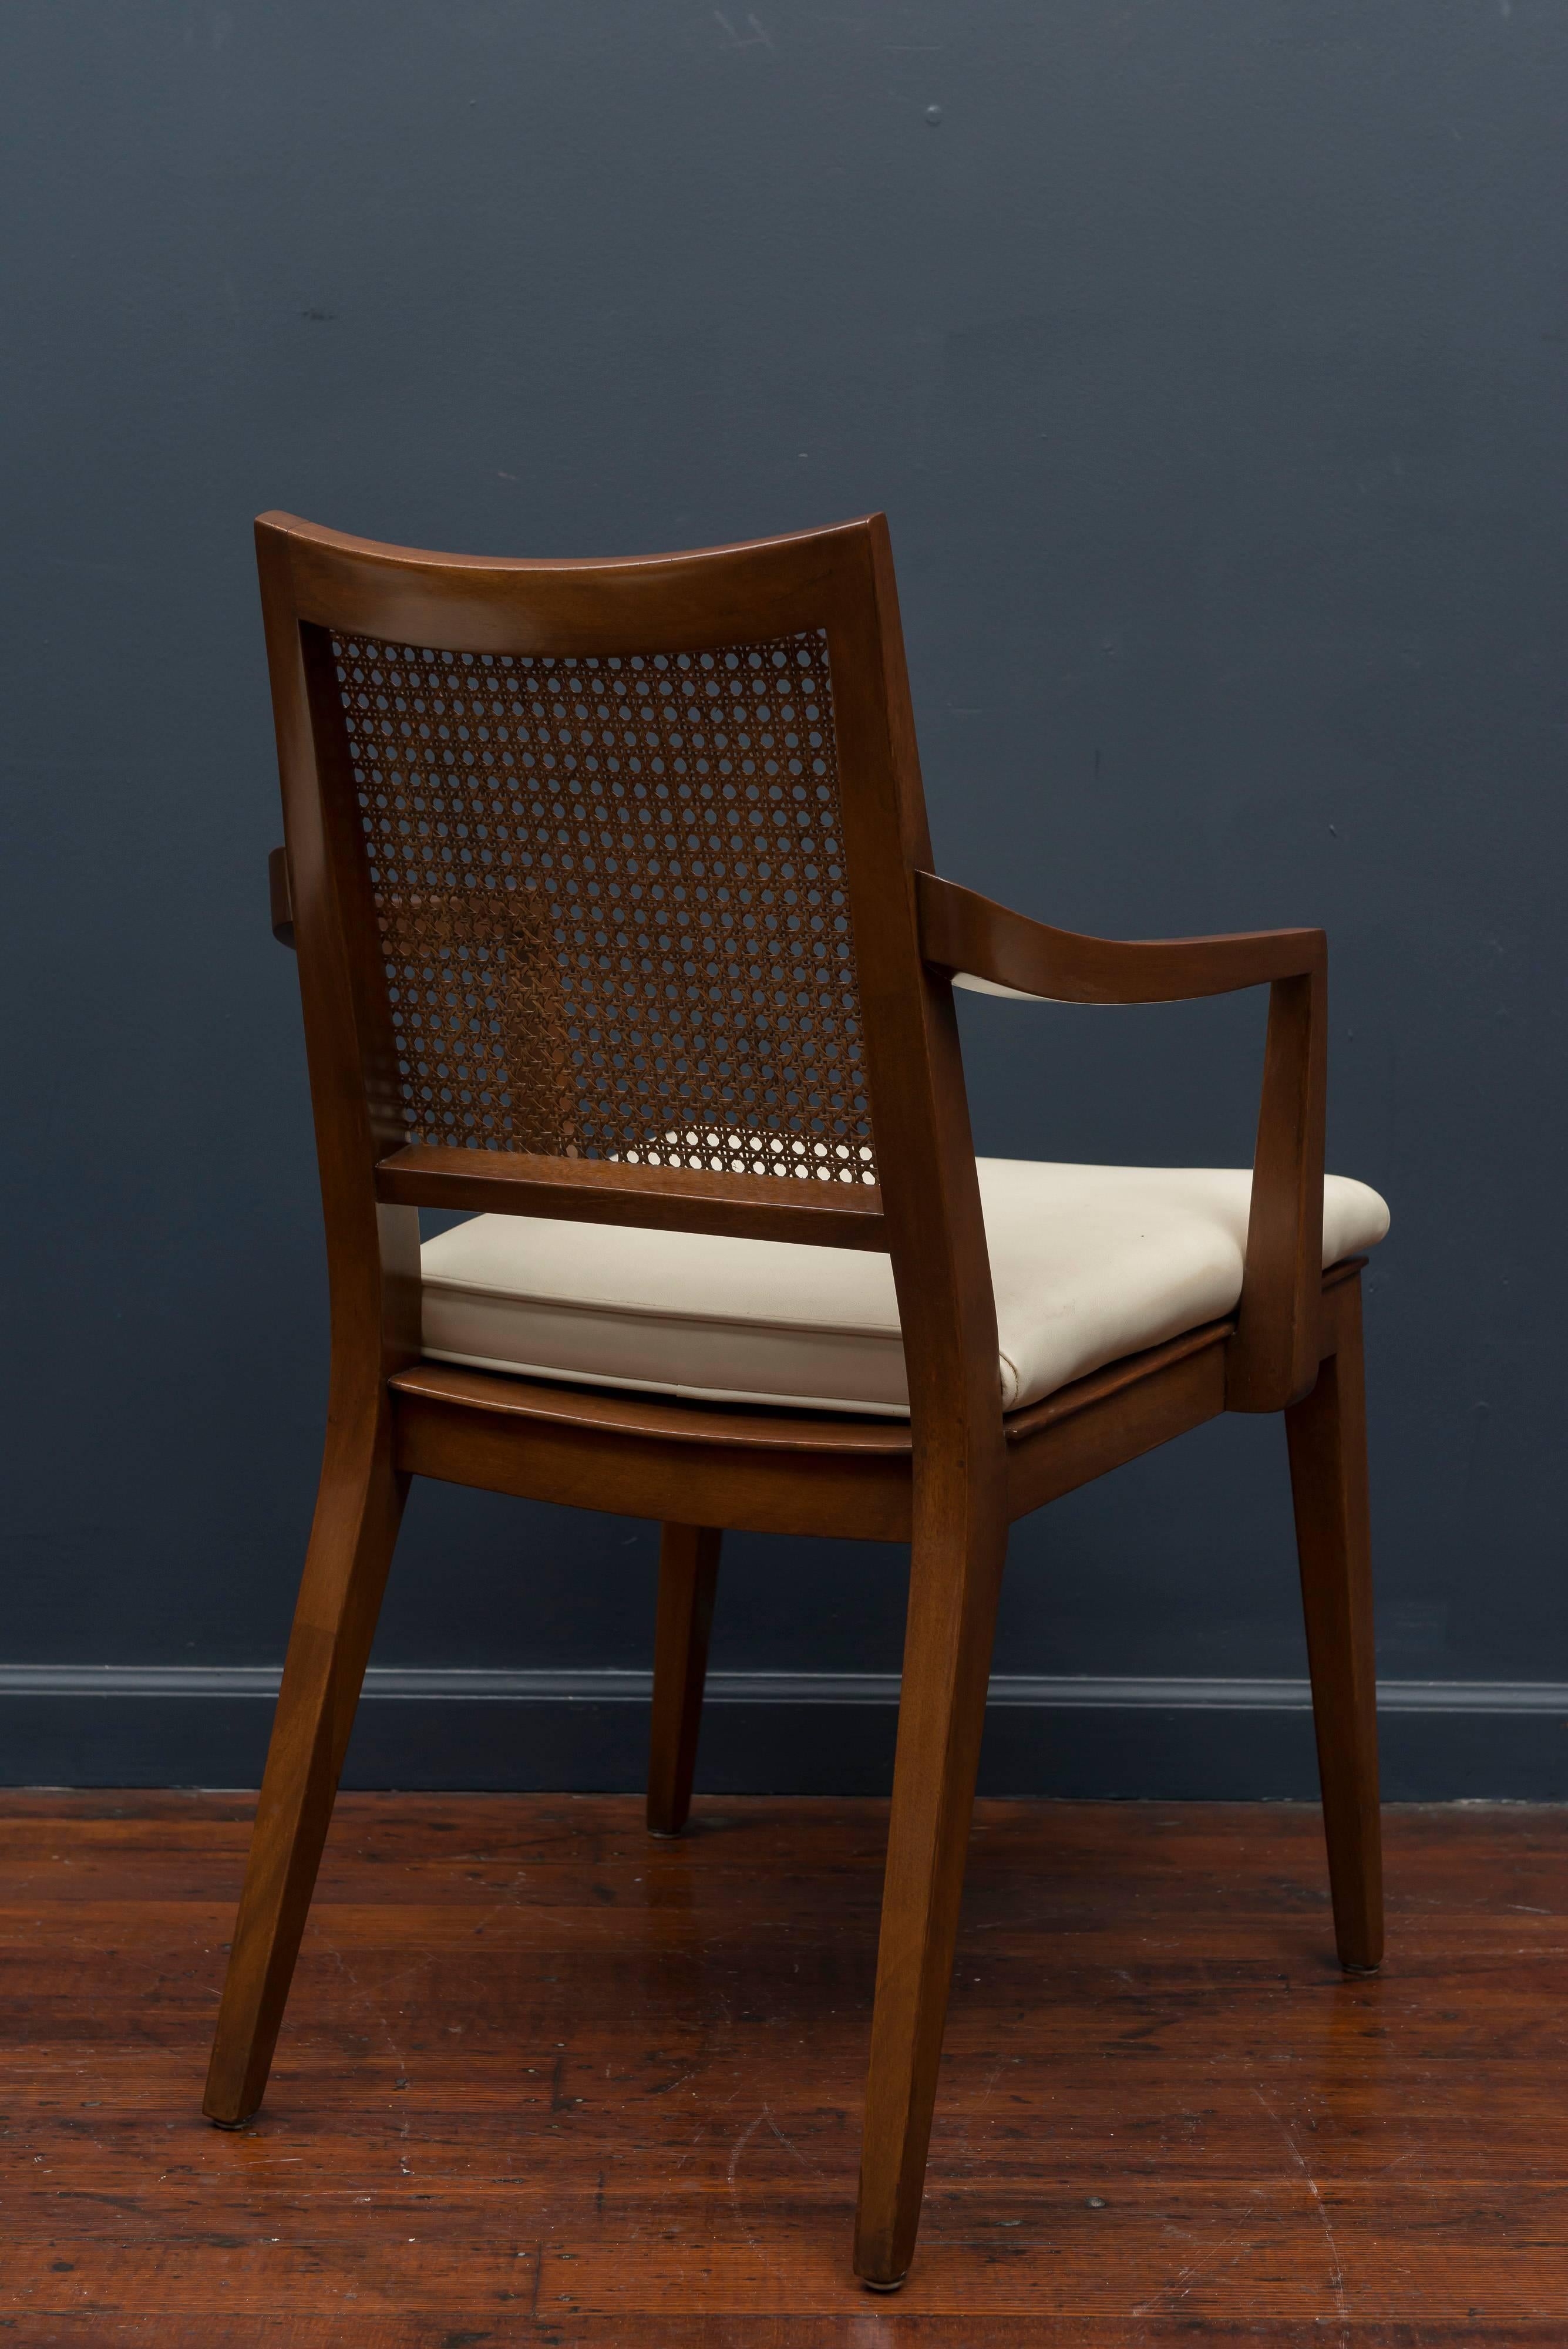 Edward Wormley Dining Chairs for Dunbar In Excellent Condition For Sale In San Francisco, CA